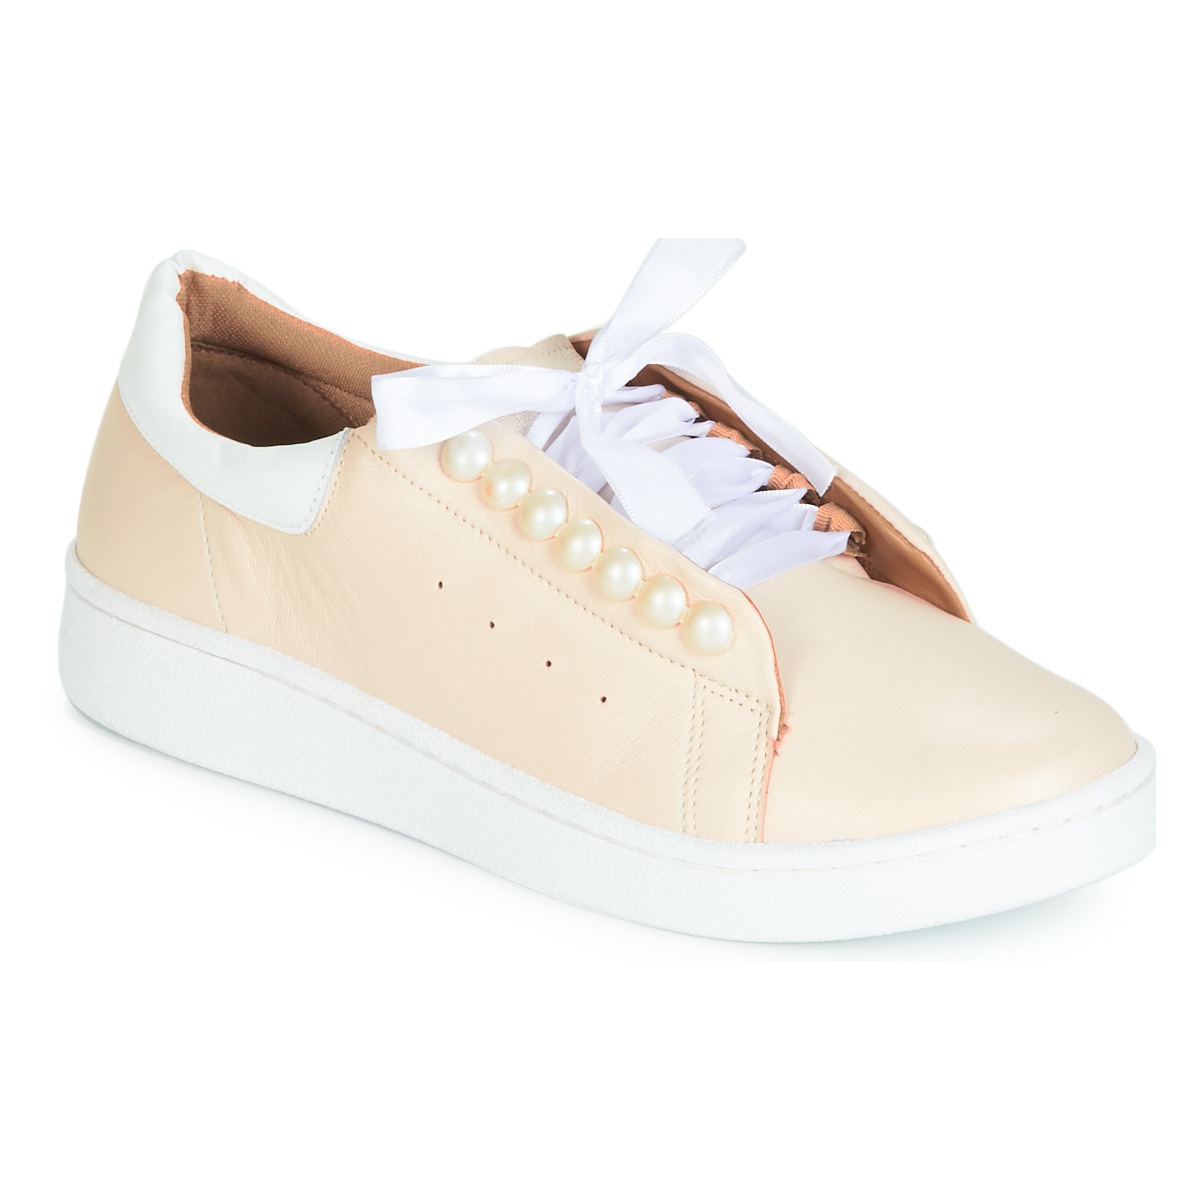 Sneakers in Beige for Woman by Spartoo GOOFASH